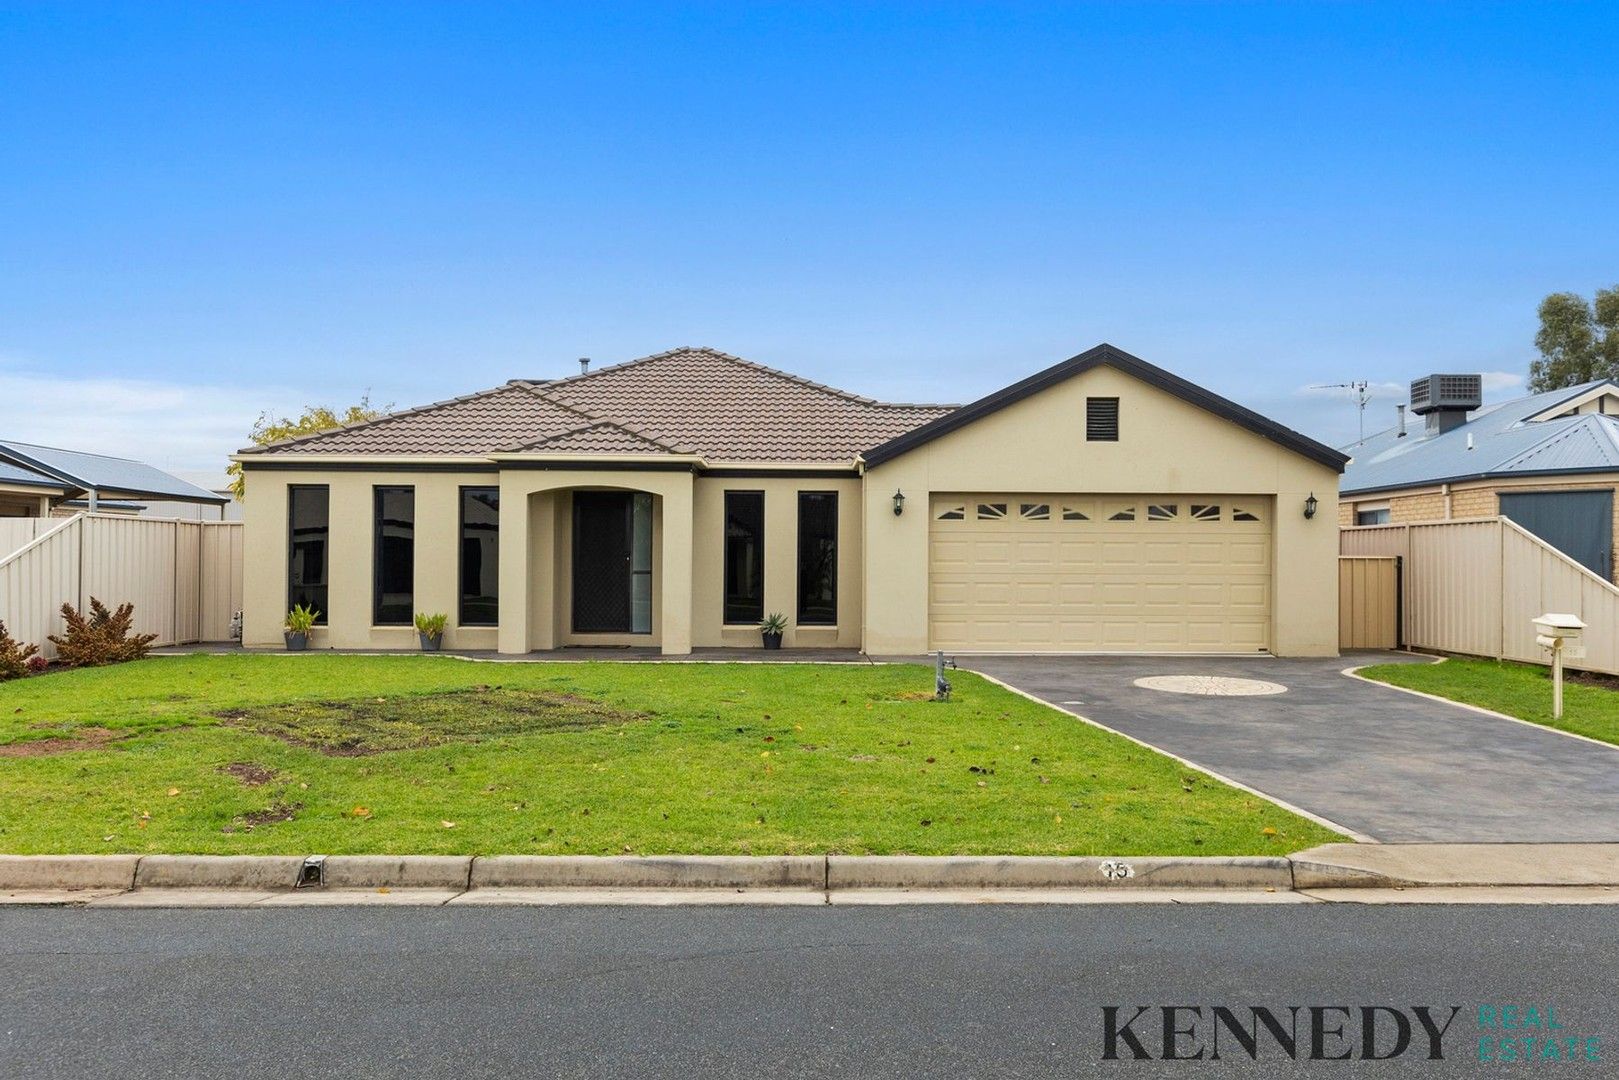 3 bedrooms House in 15 Derry Drive YARRAWONGA VIC, 3730